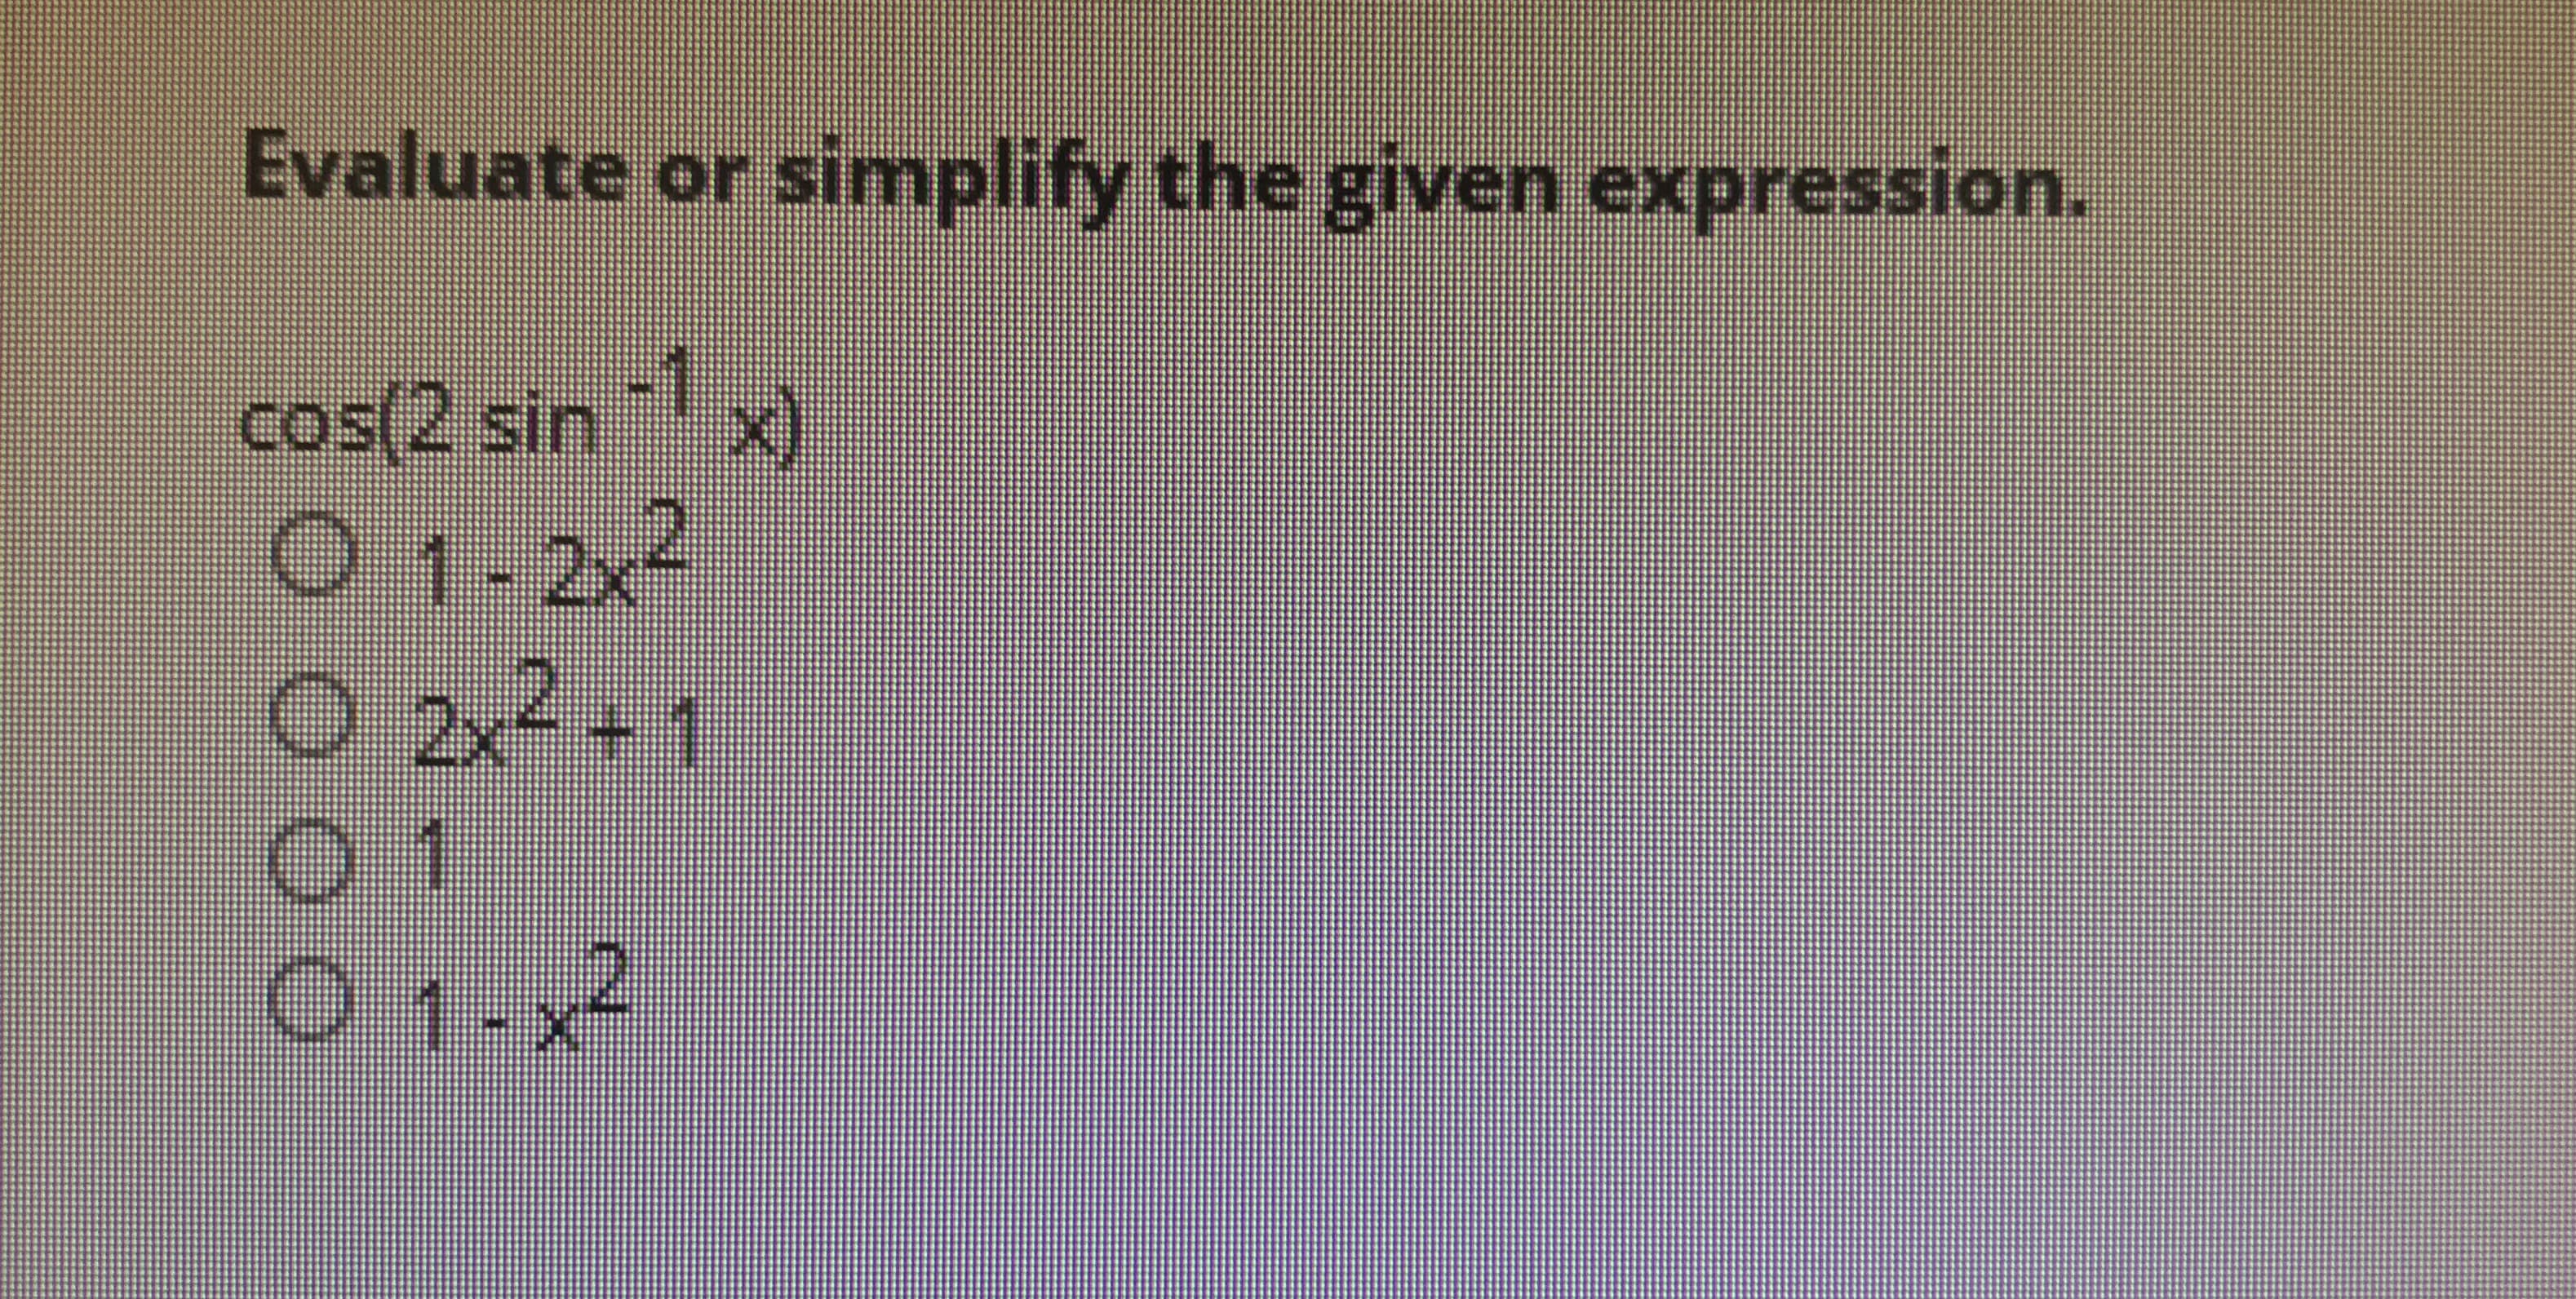 Evaluate or simplify the given expression.
cos(2 sinx)
